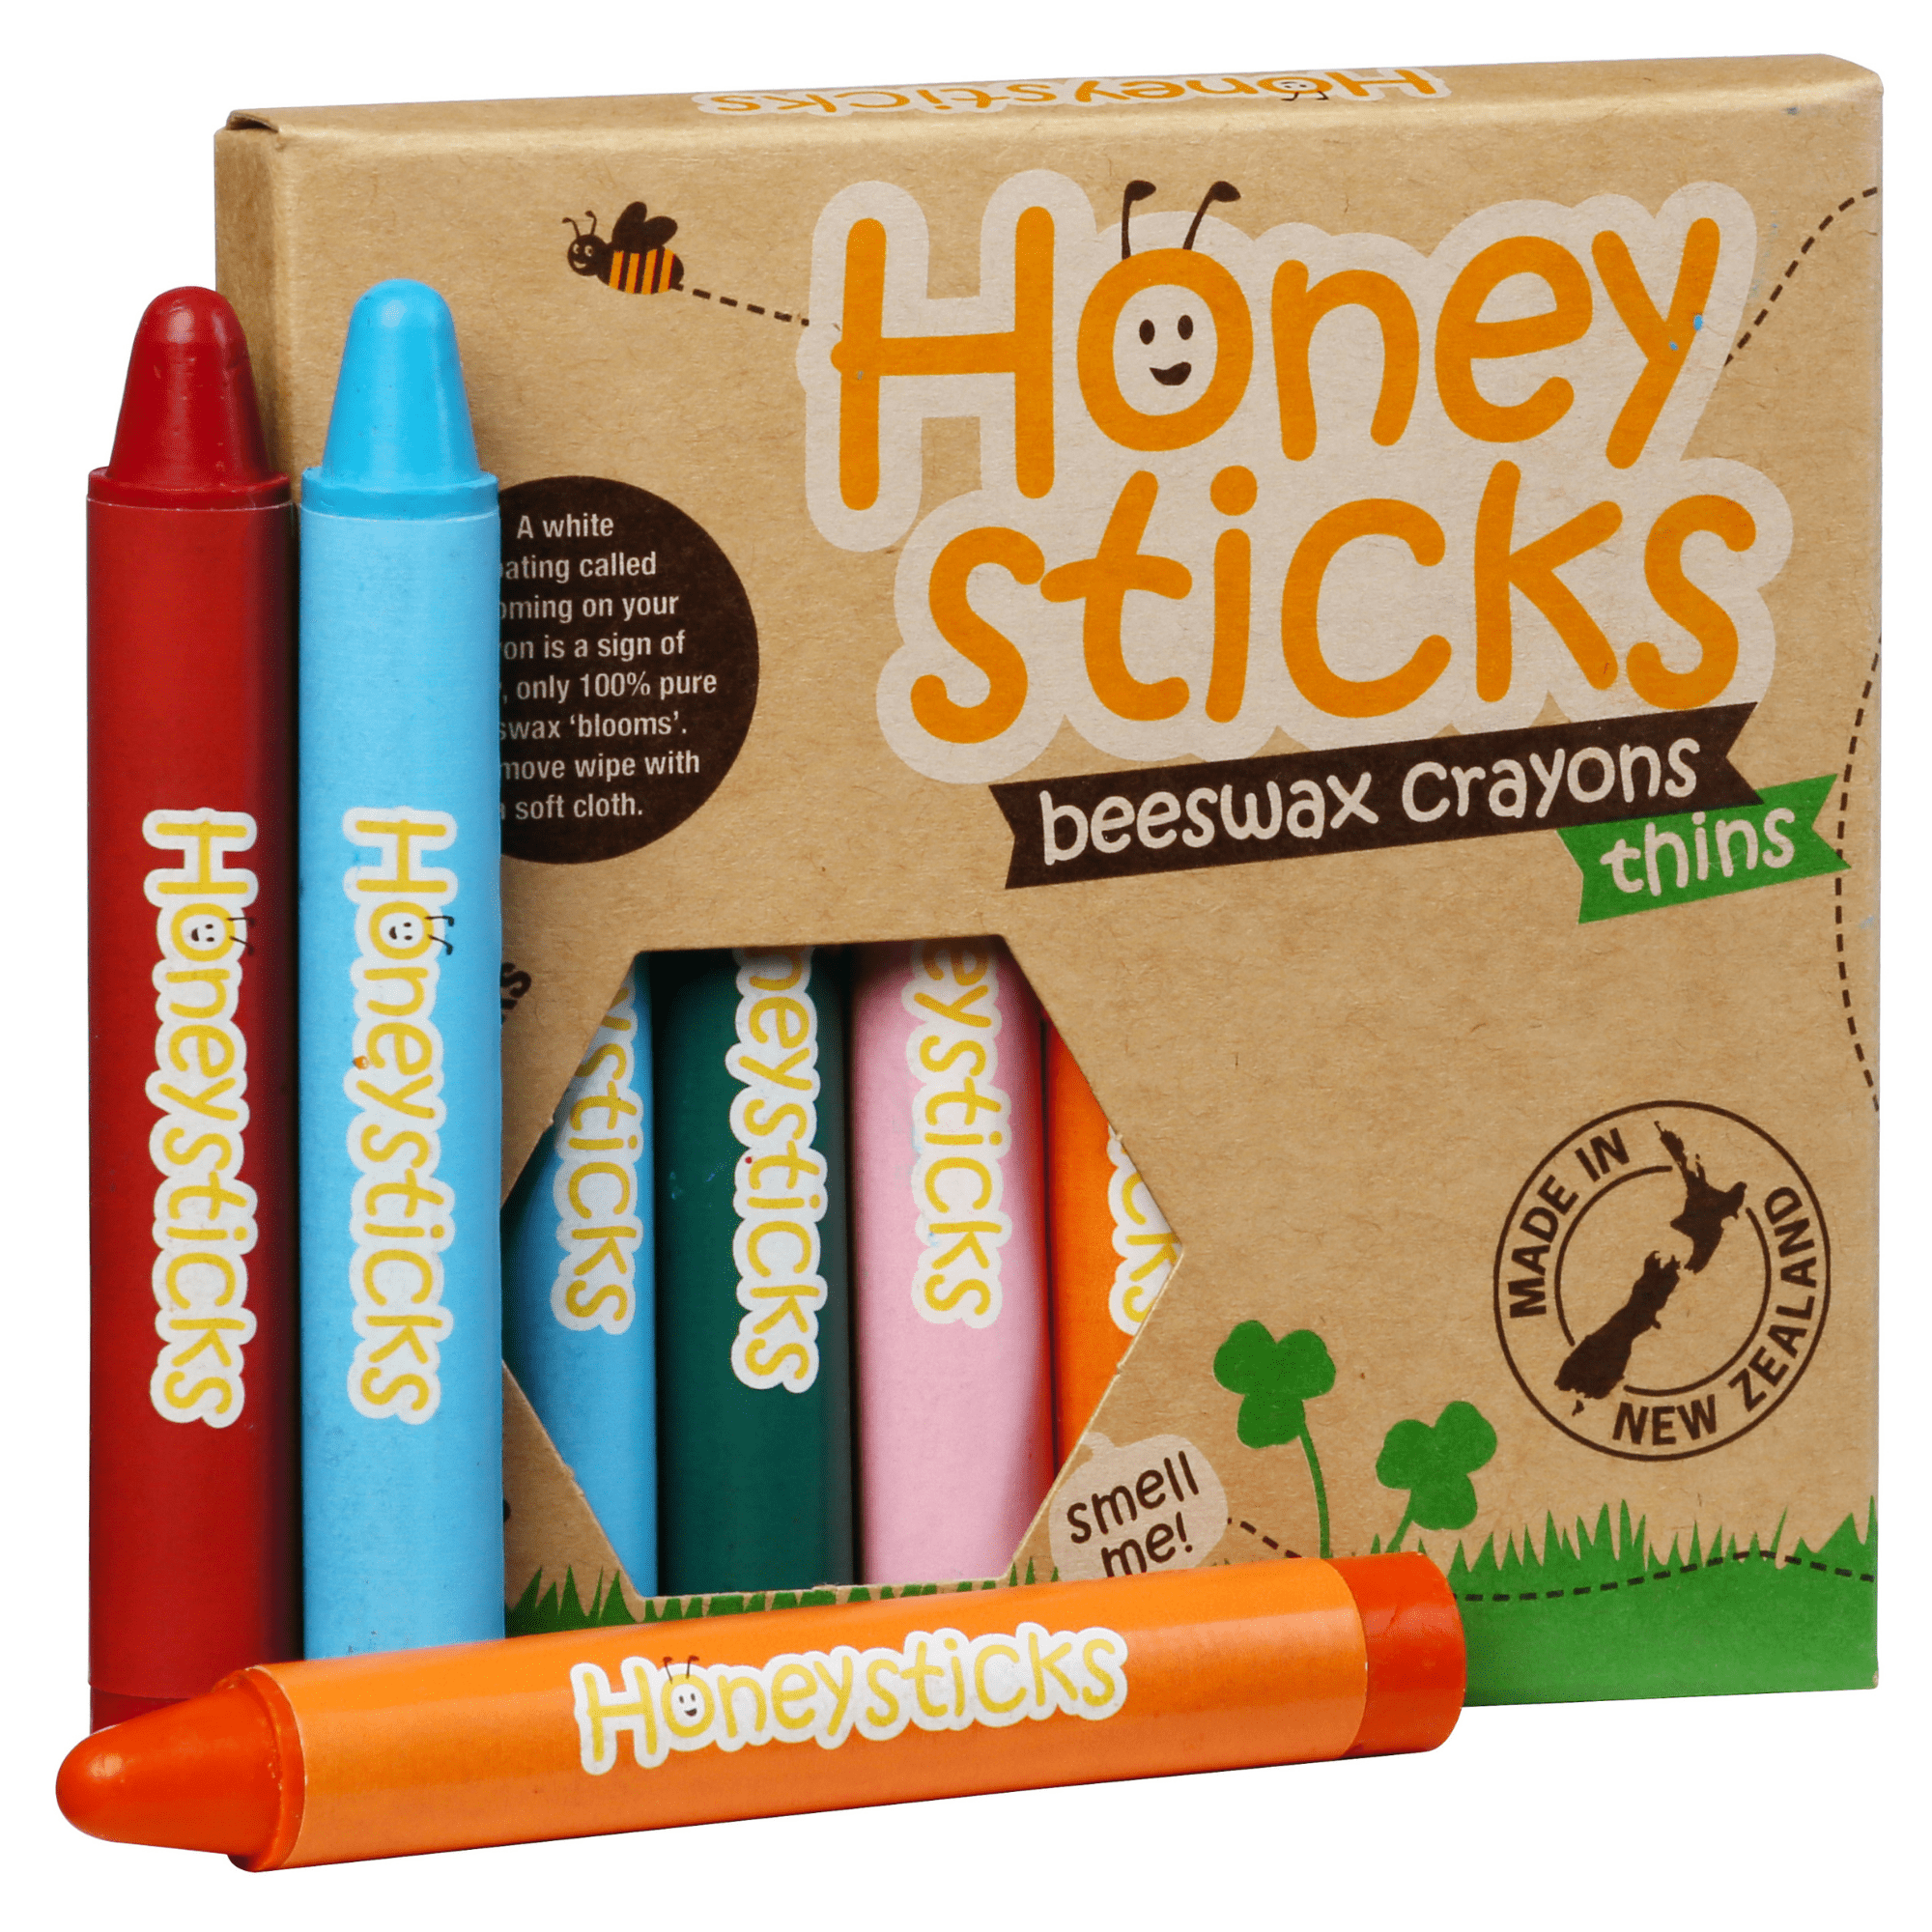 Honeysticks Pure Beeswax Crayons - Classic Crayon Size and Shape for a  Developed Pencil Grip - 8 Vibrant Colors - Child Safe, Non Toxic Crayons  for Kids, - Food Grade Colorings - 8 Pack 